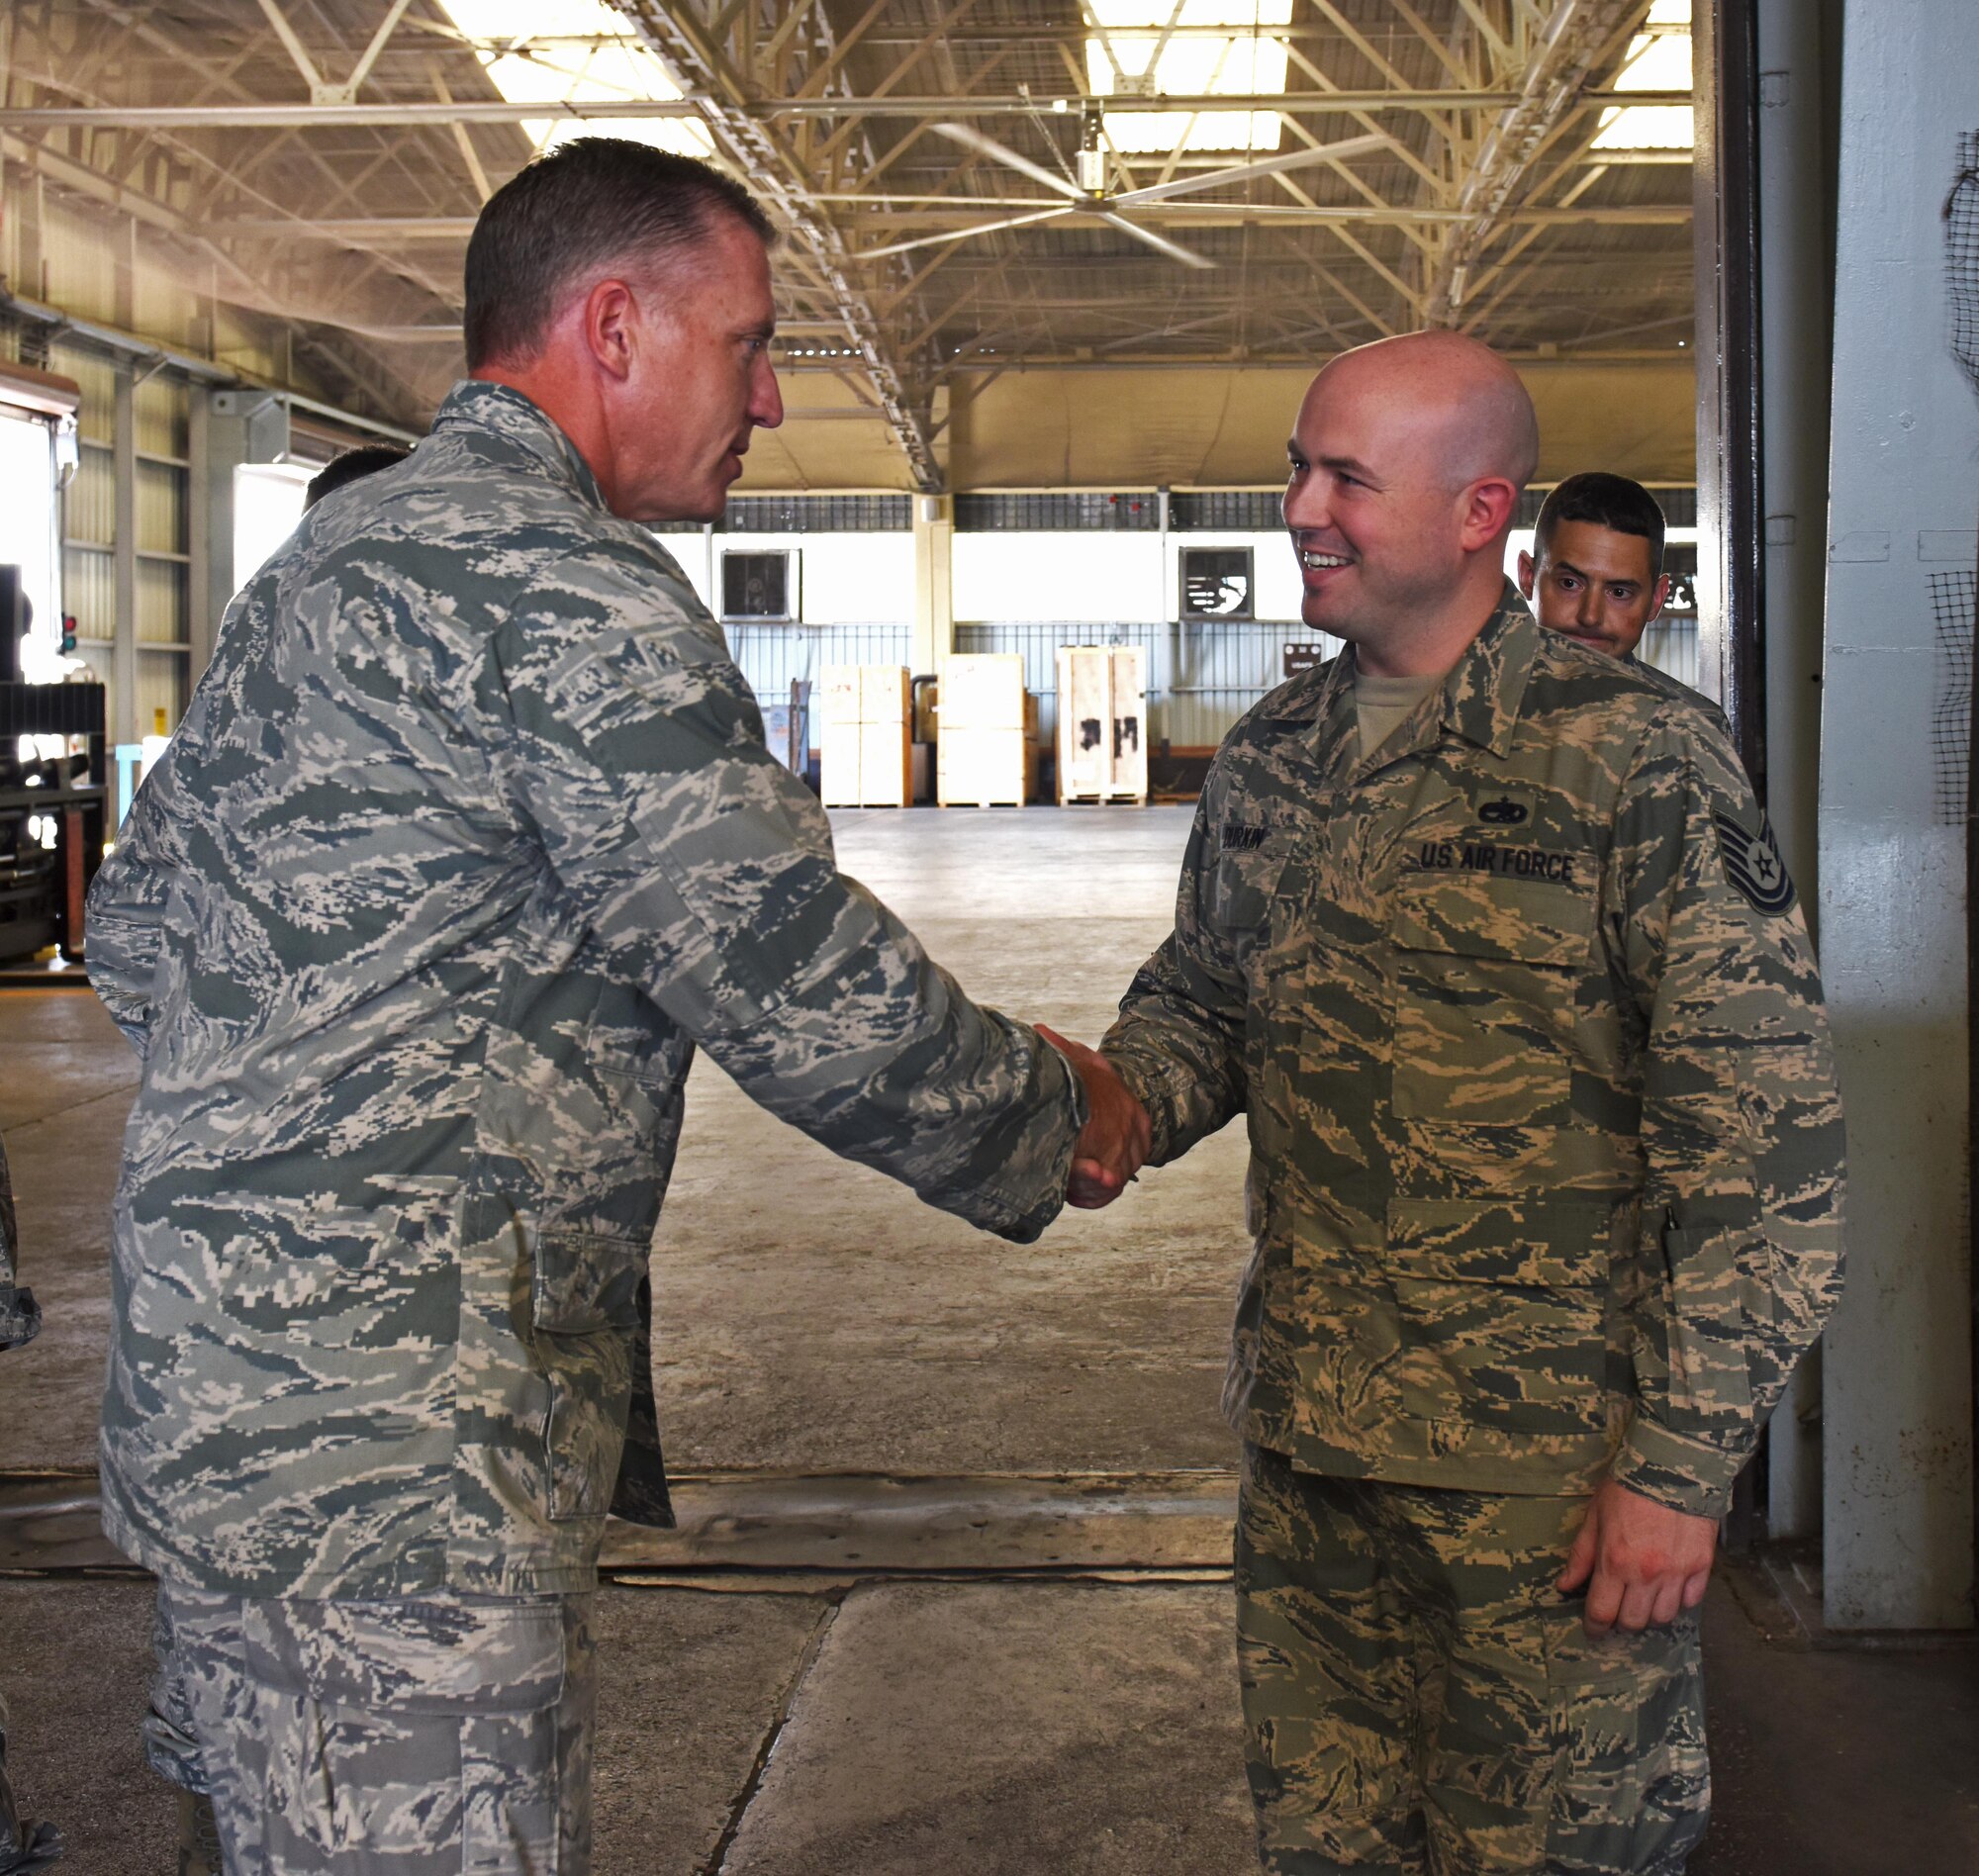 U.S. Air Force Col. David Eaglin (left), 39th Air Base wing commander, coins Tech. Sgt. Sean Durkin, 728th Air Mobility Squadron maintenance training monitor, for superior performance, July 17, 2017 at Incirlik Air Base, Turkey. The 728th AMS provides expertise in three core competencies: aerial port operations, aircraft maintenance, and command and control. (U.S. Air Force photo by Senior Airman Jasmonet D. Jackson)